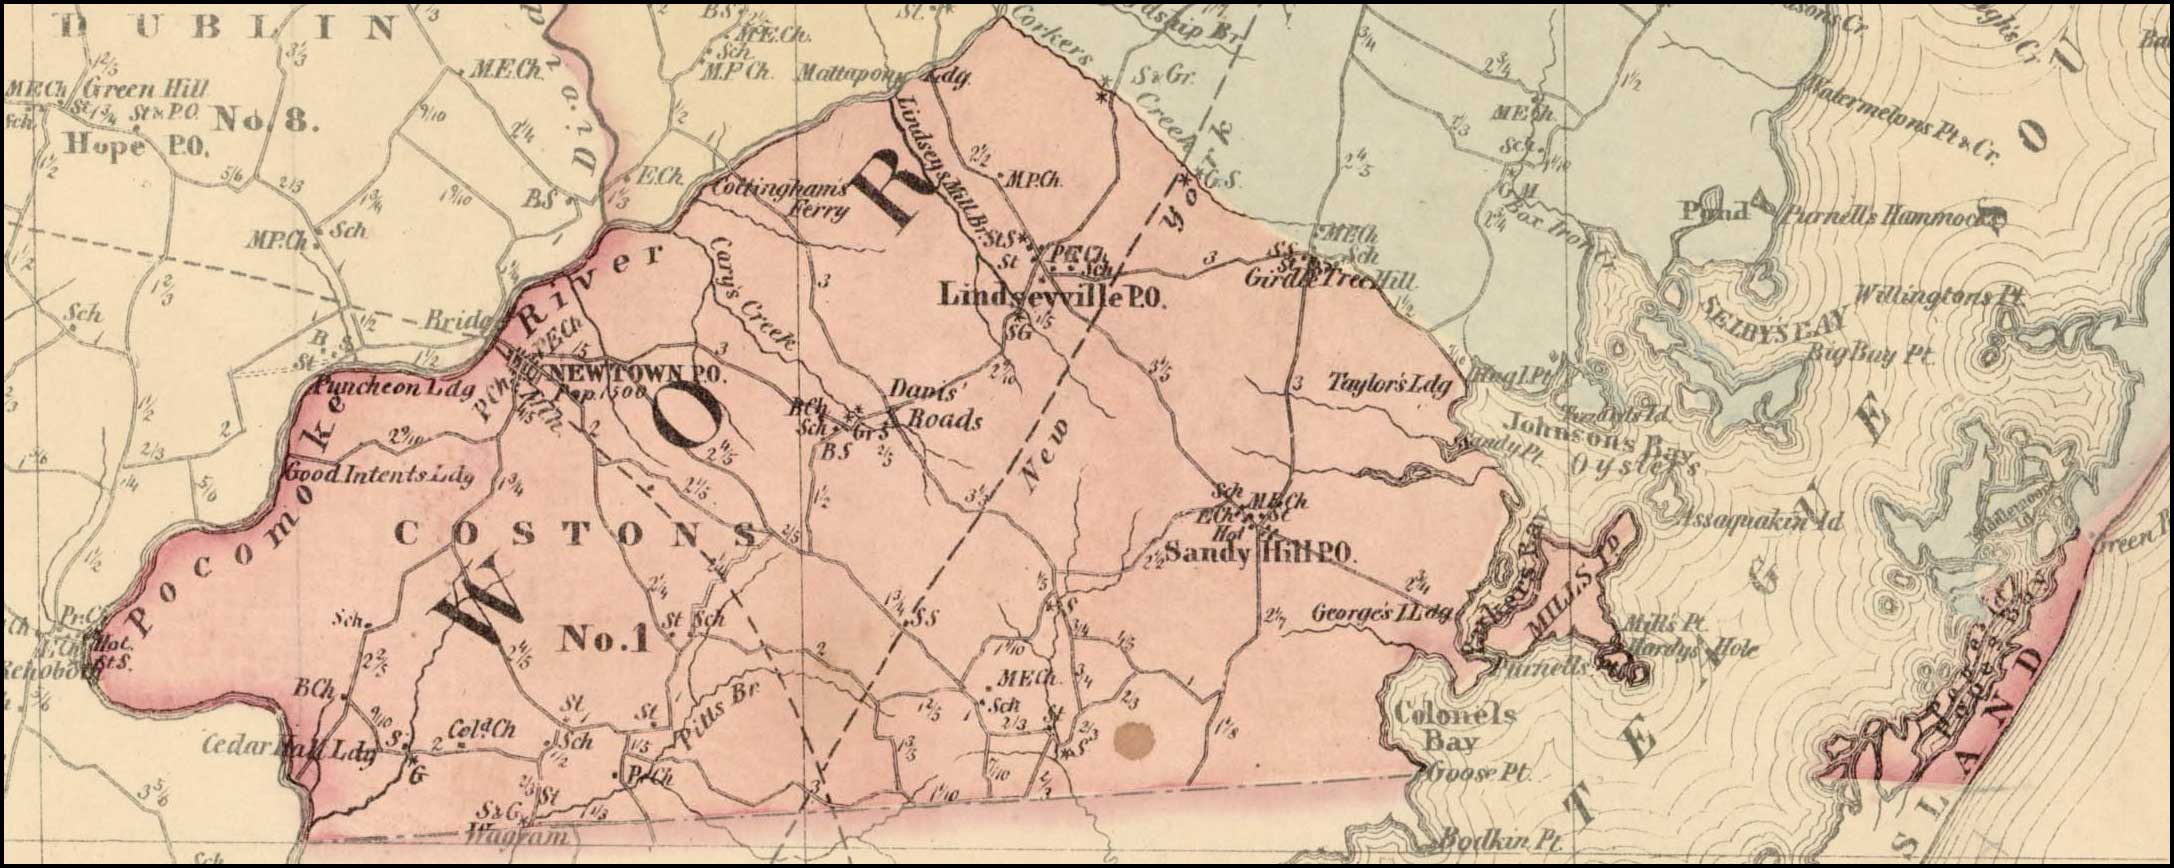 Simon J. Martenet, Map of Worcester County, 1865, Huntingfield Collection MSA SC 1399-1-75